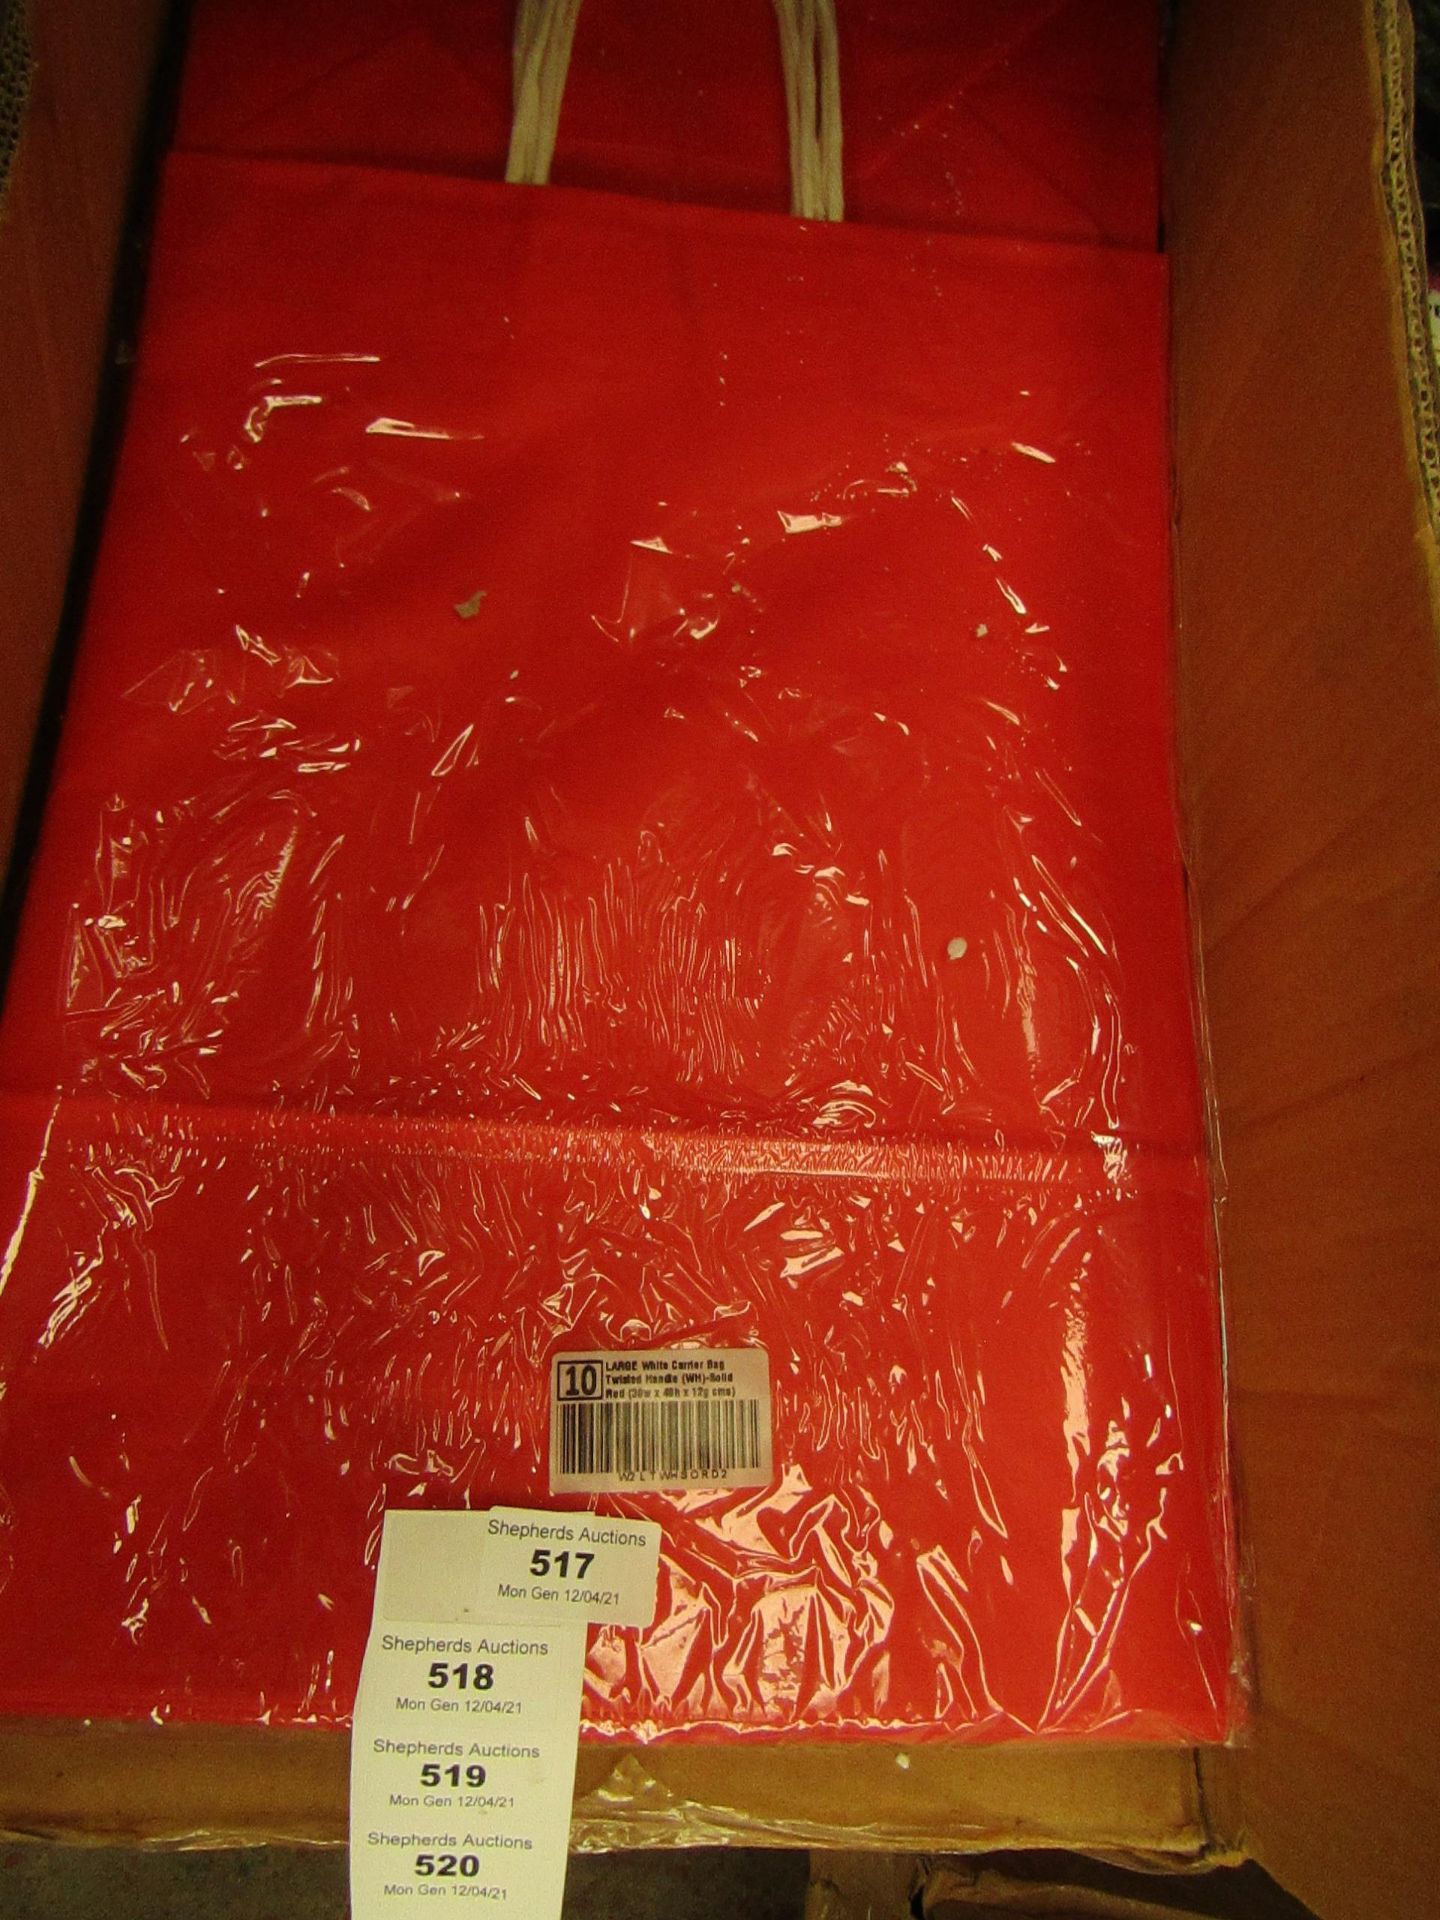 5x Pack of 10 Large, Red Carrier Bags with Rope Handles - New & Packaged.